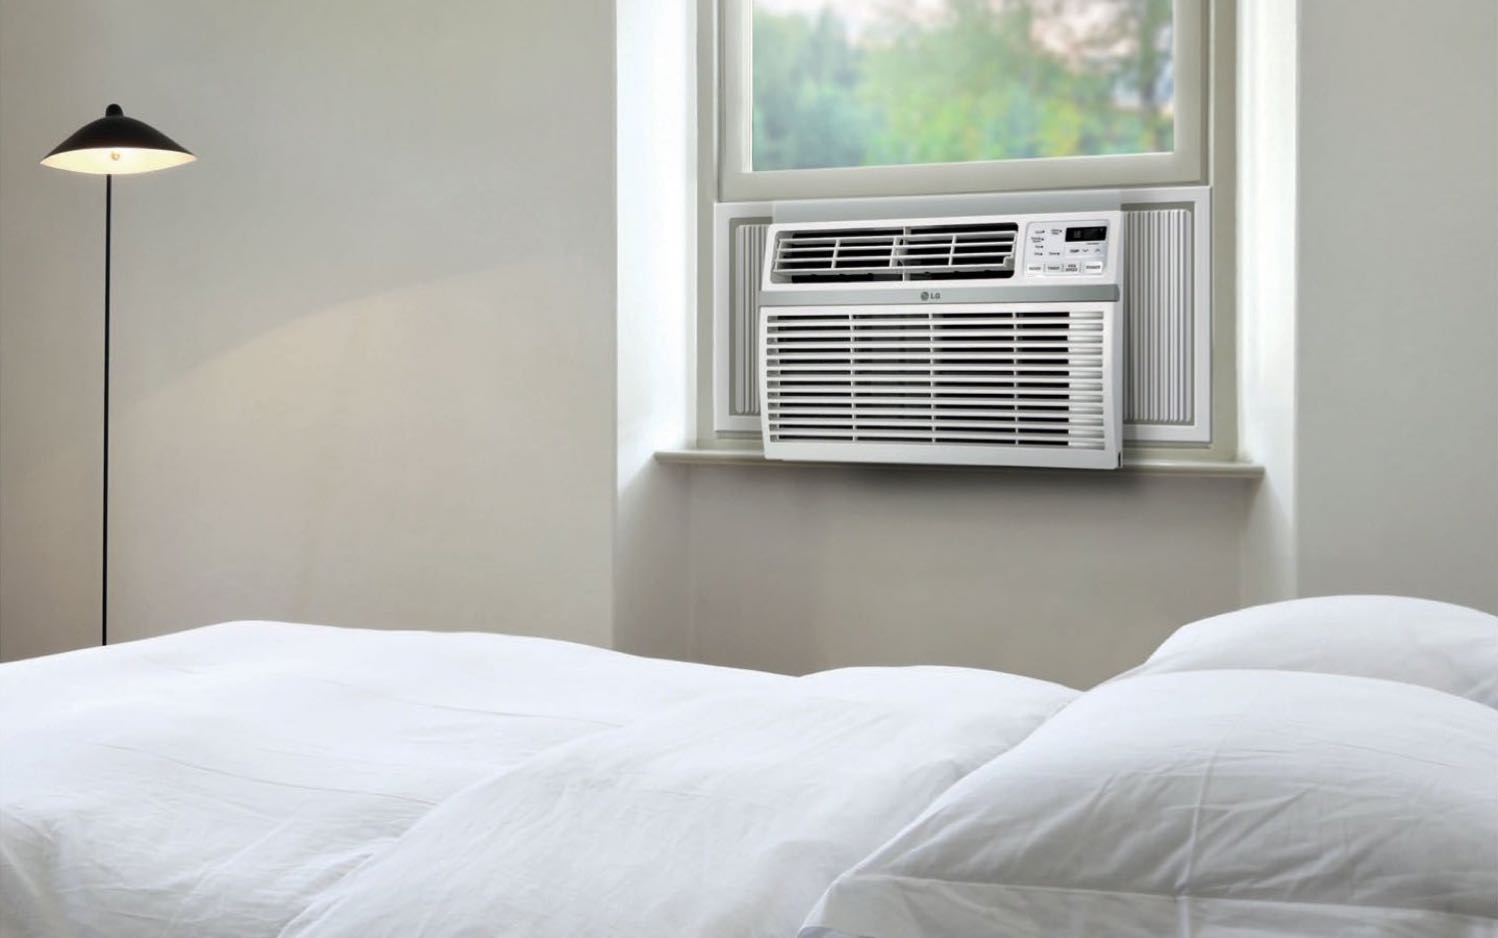 window ac for 400 sq ft room